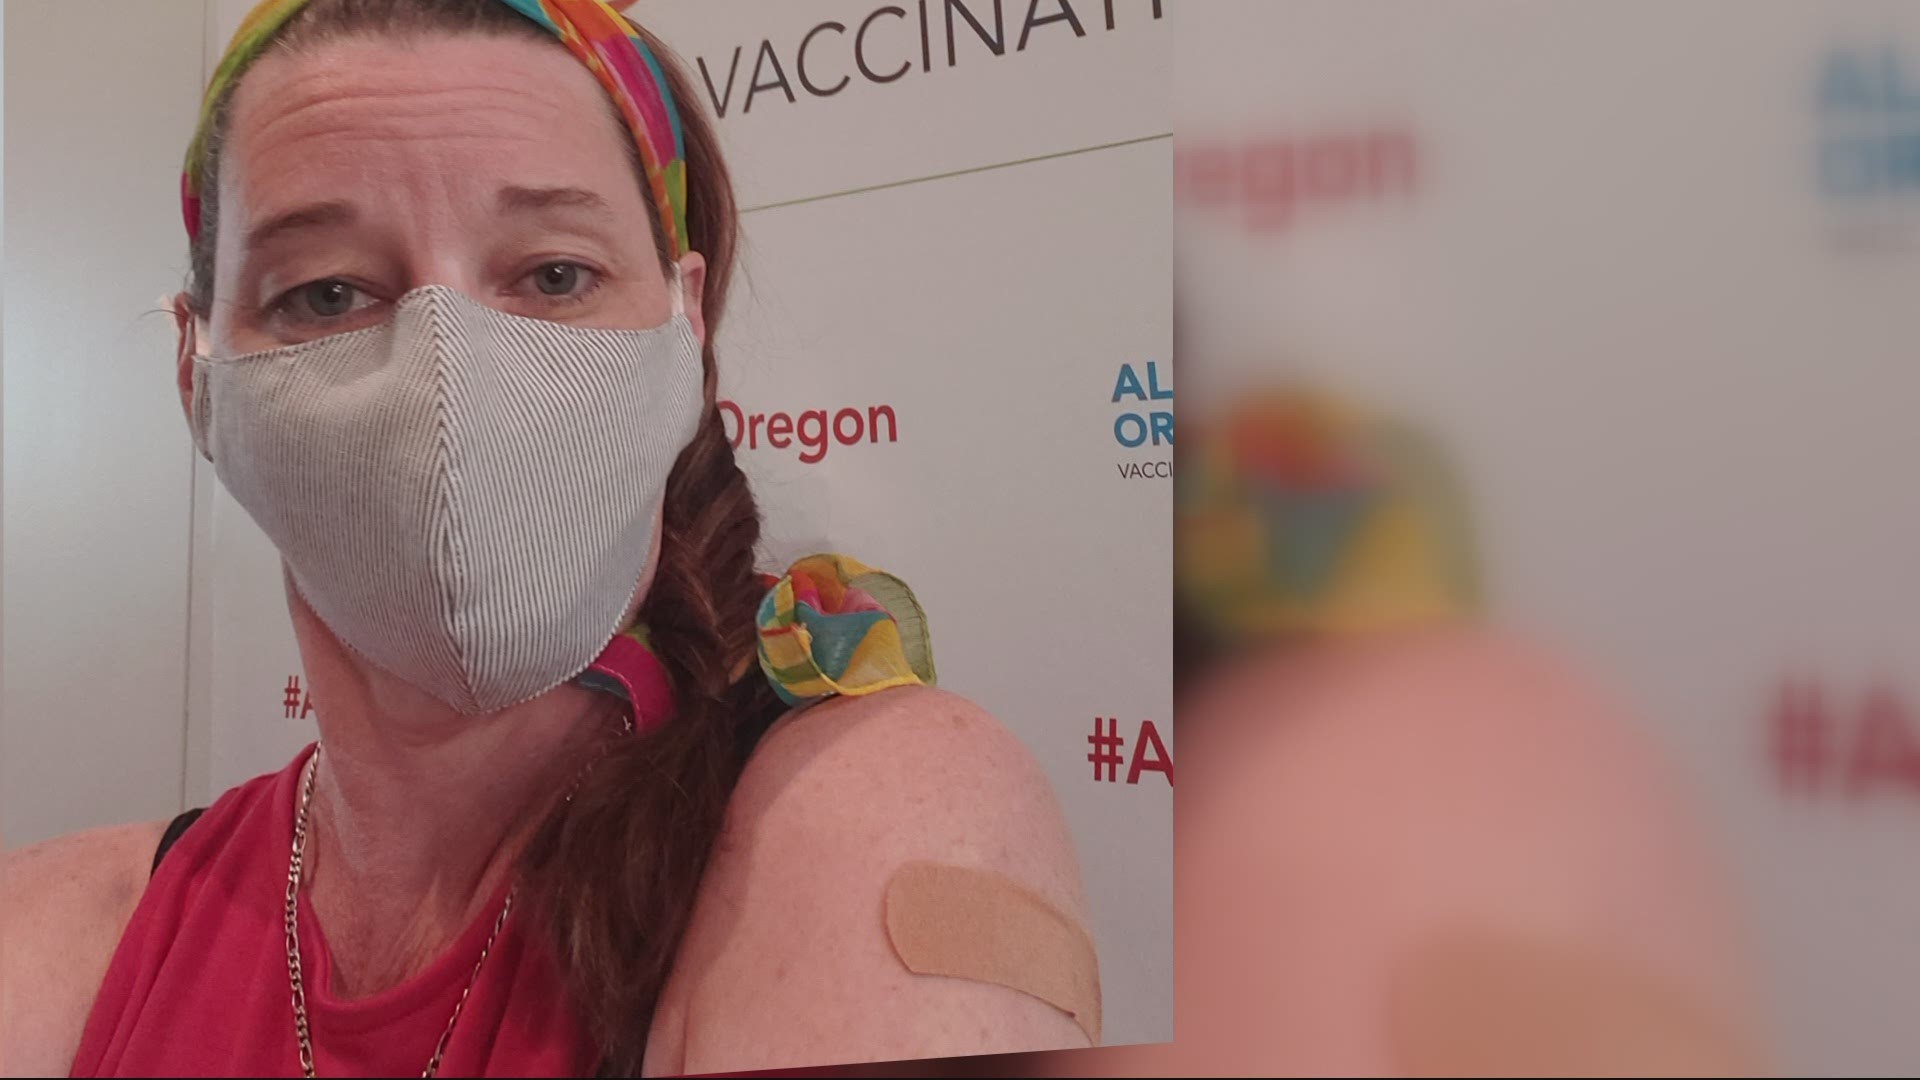 Two shots in the arm may be the relief that COVID long-haulers have waited for.  Some people dealing with symptoms report feeling better after getting vaccinated.